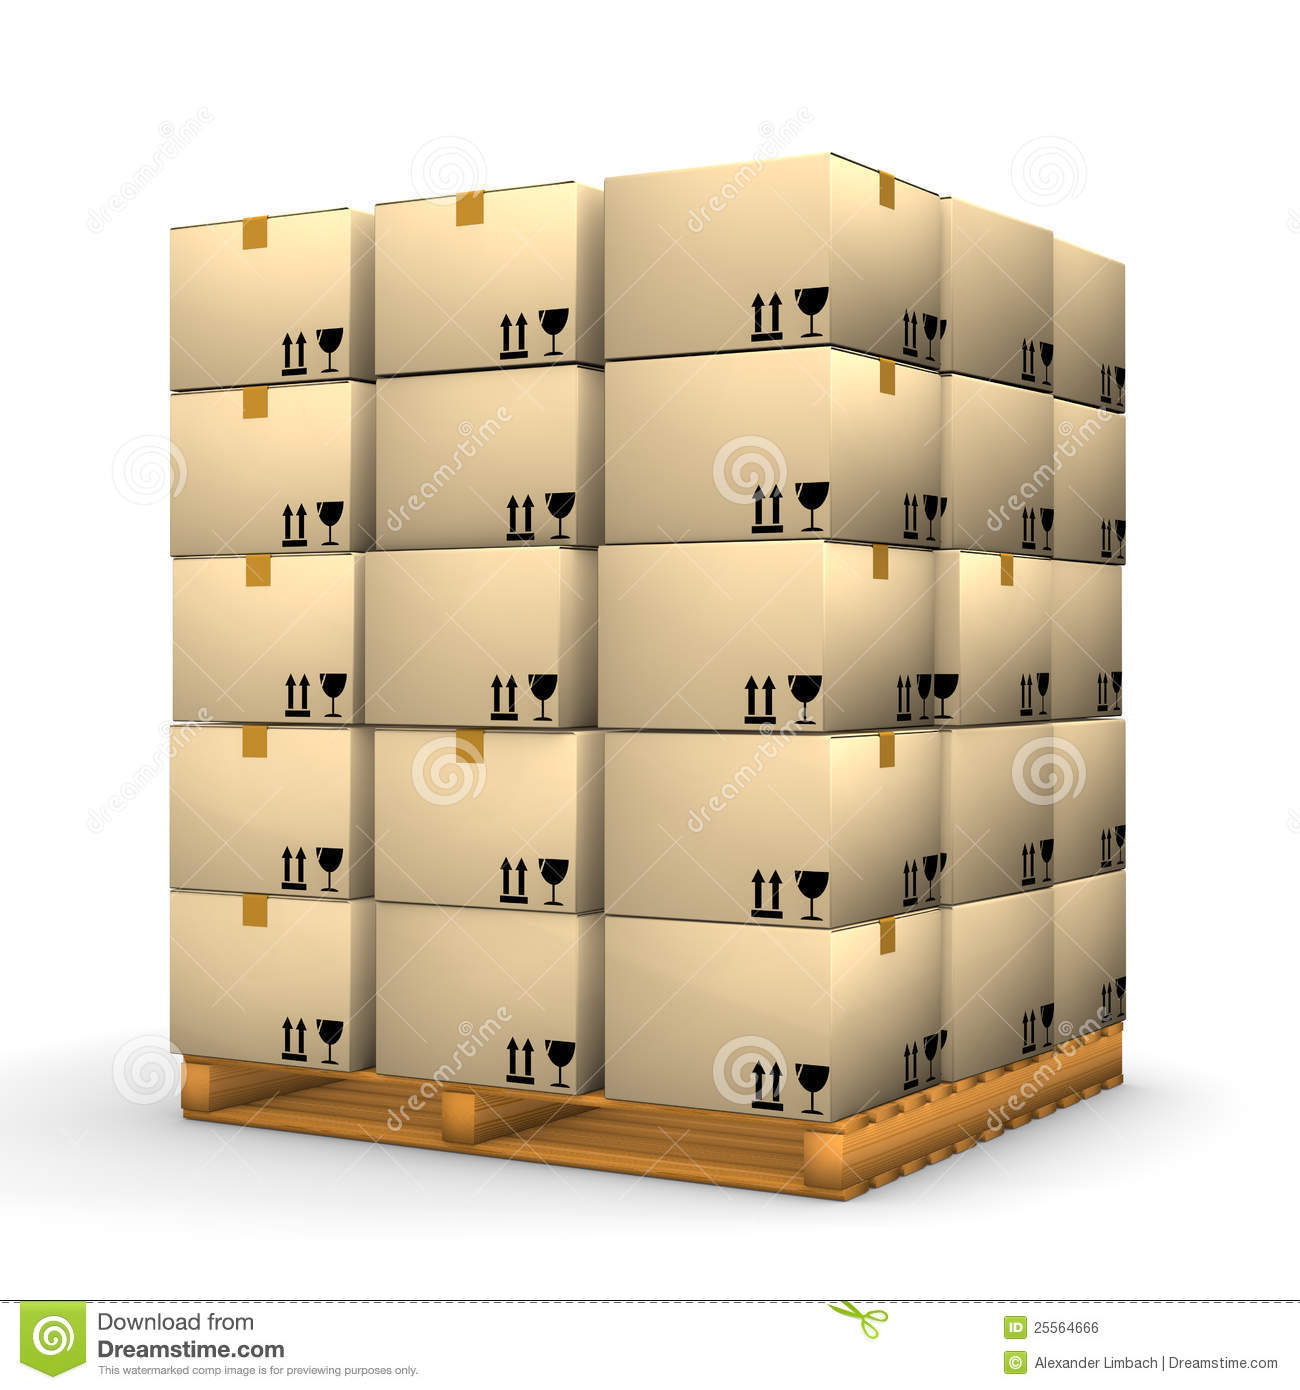 Boxes Stacked On Pallet Royalty Free Stock Image   Image  25564666